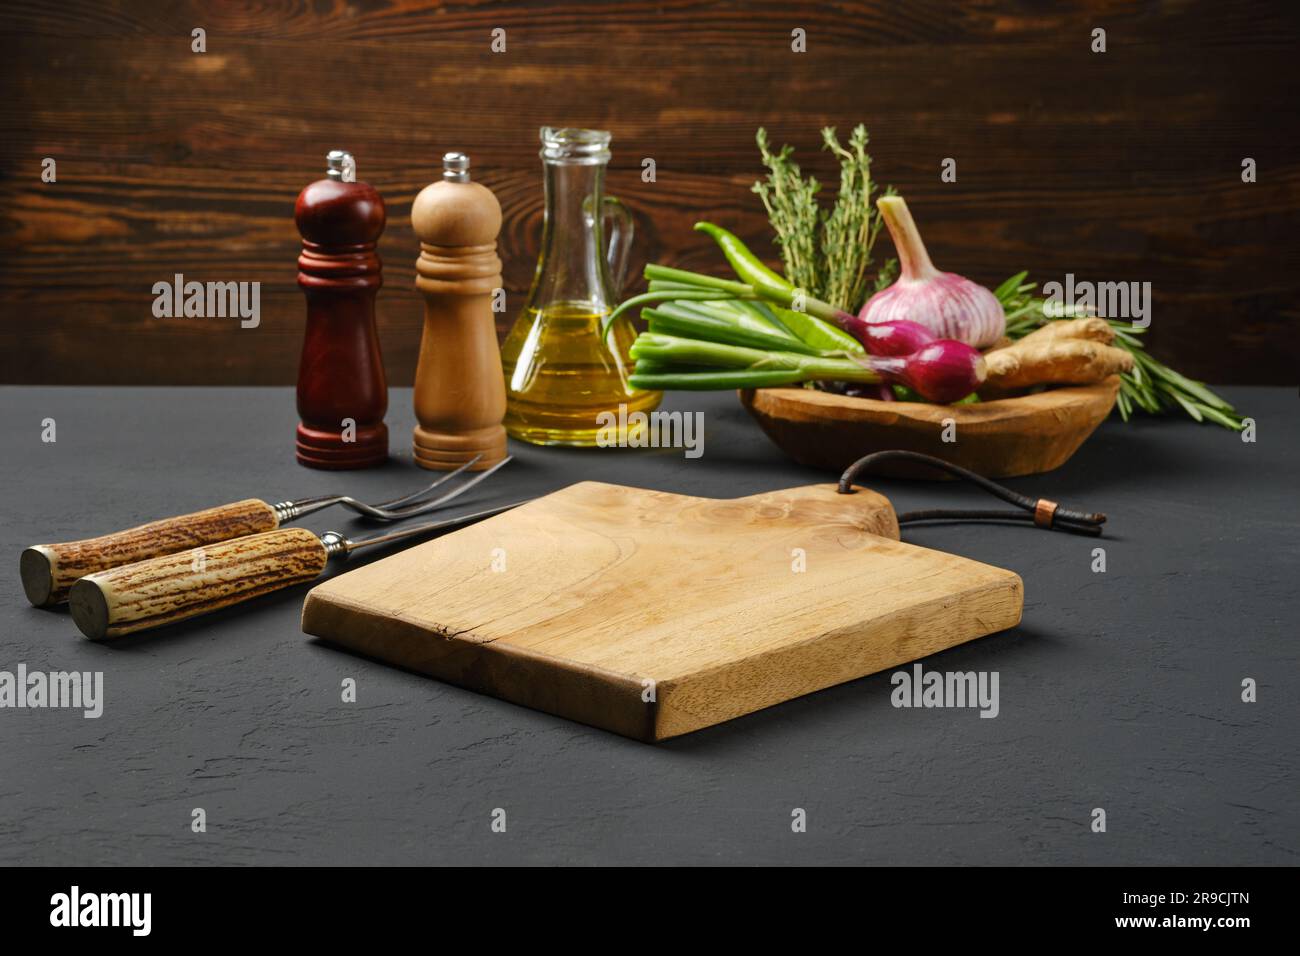 https://c8.alamy.com/comp/2R9CJTN/empty-wooden-cutting-board-surrounded-with-spice-and-seasonings-2R9CJTN.jpg